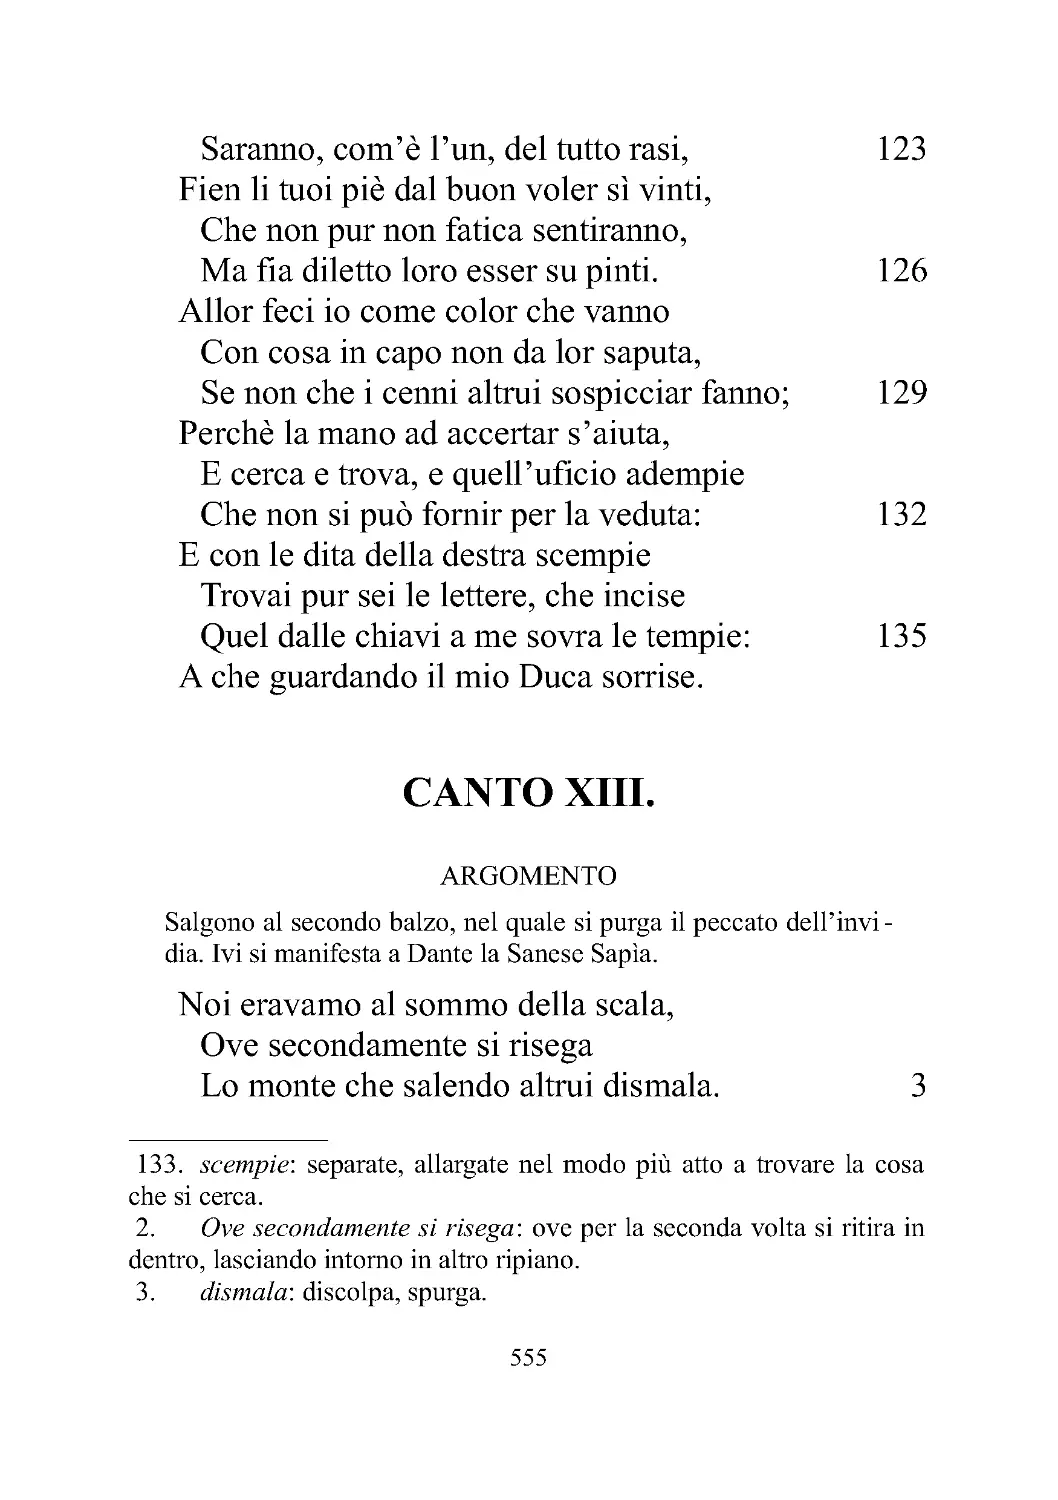 CANTO XIII.